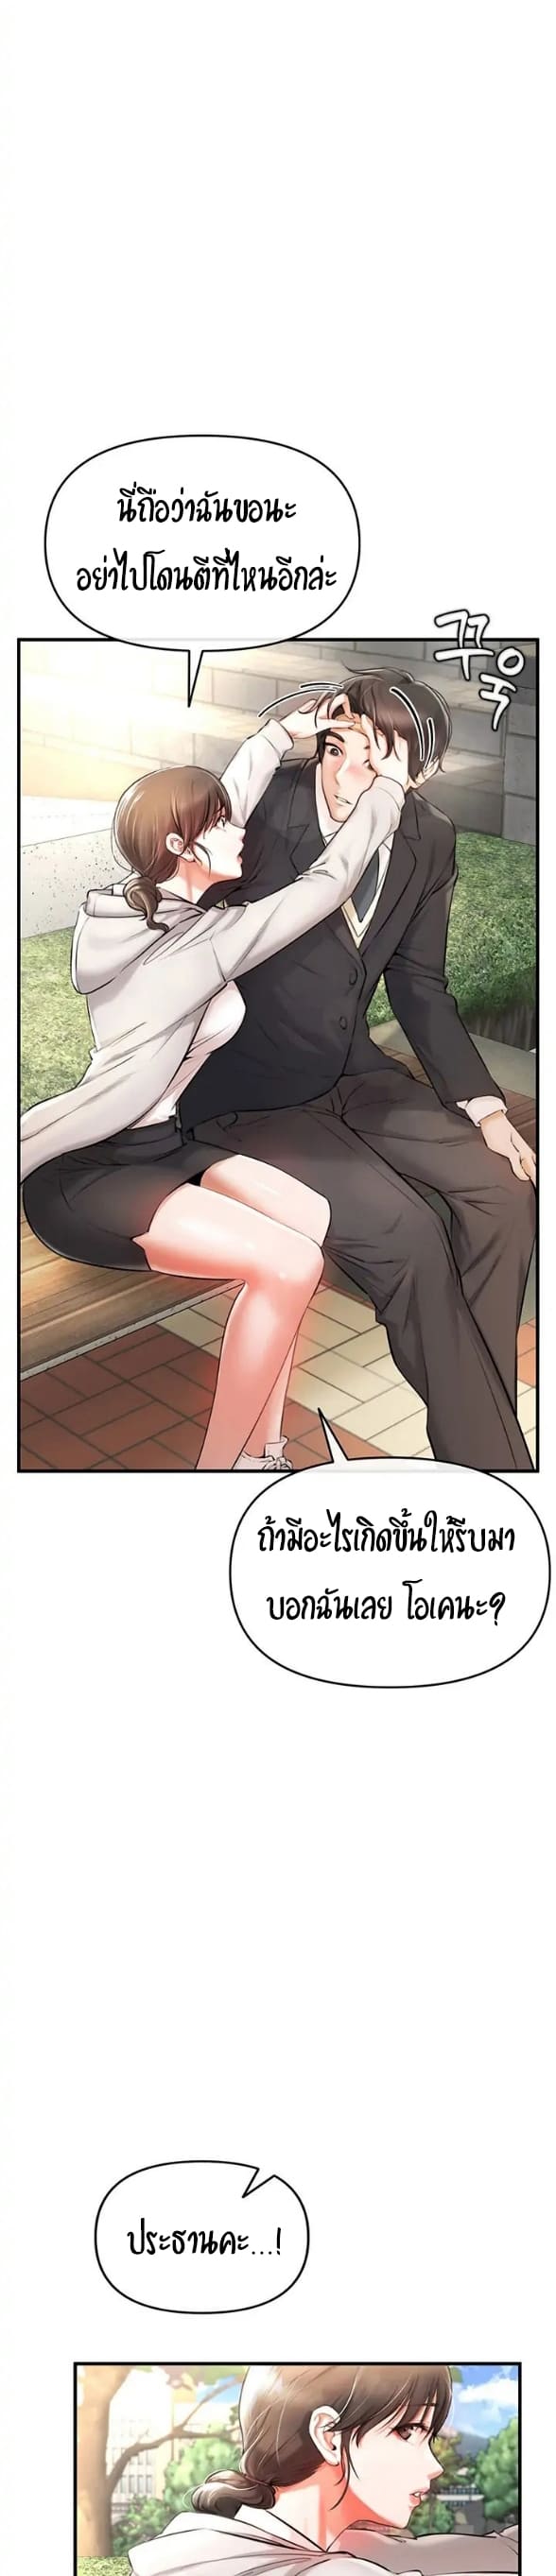 The Real Deal ตอนที่ 1 ภาพ 38